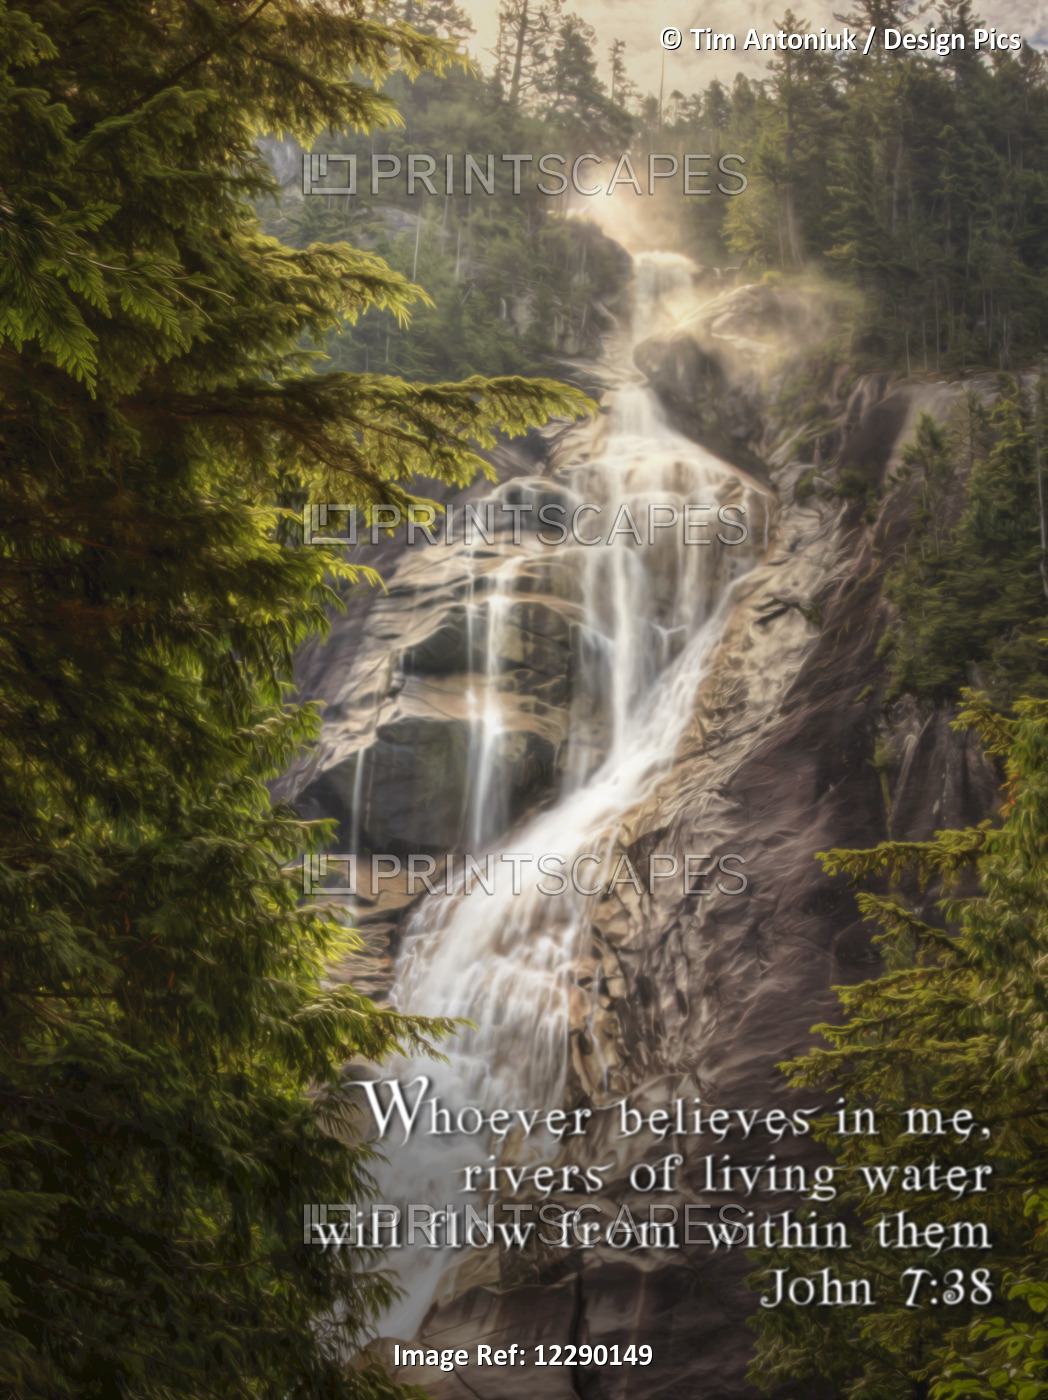 Image Of Waterfalls Over Steep Cliffs And A Scripture From John 7:38